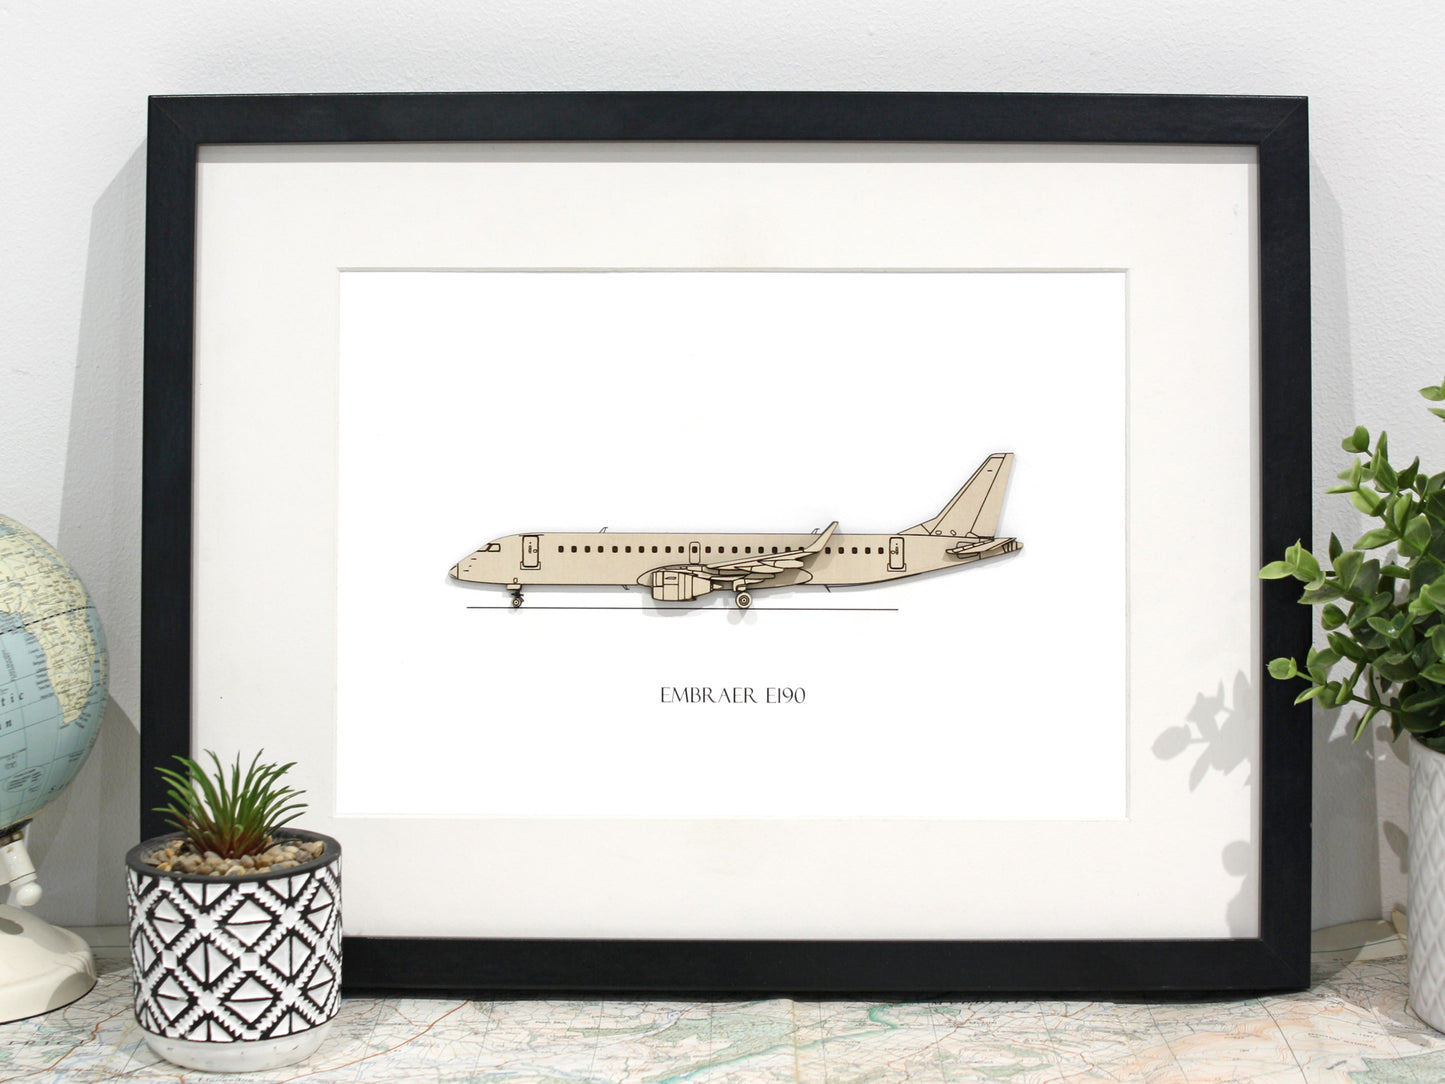 Embraer E190 aviation gifts